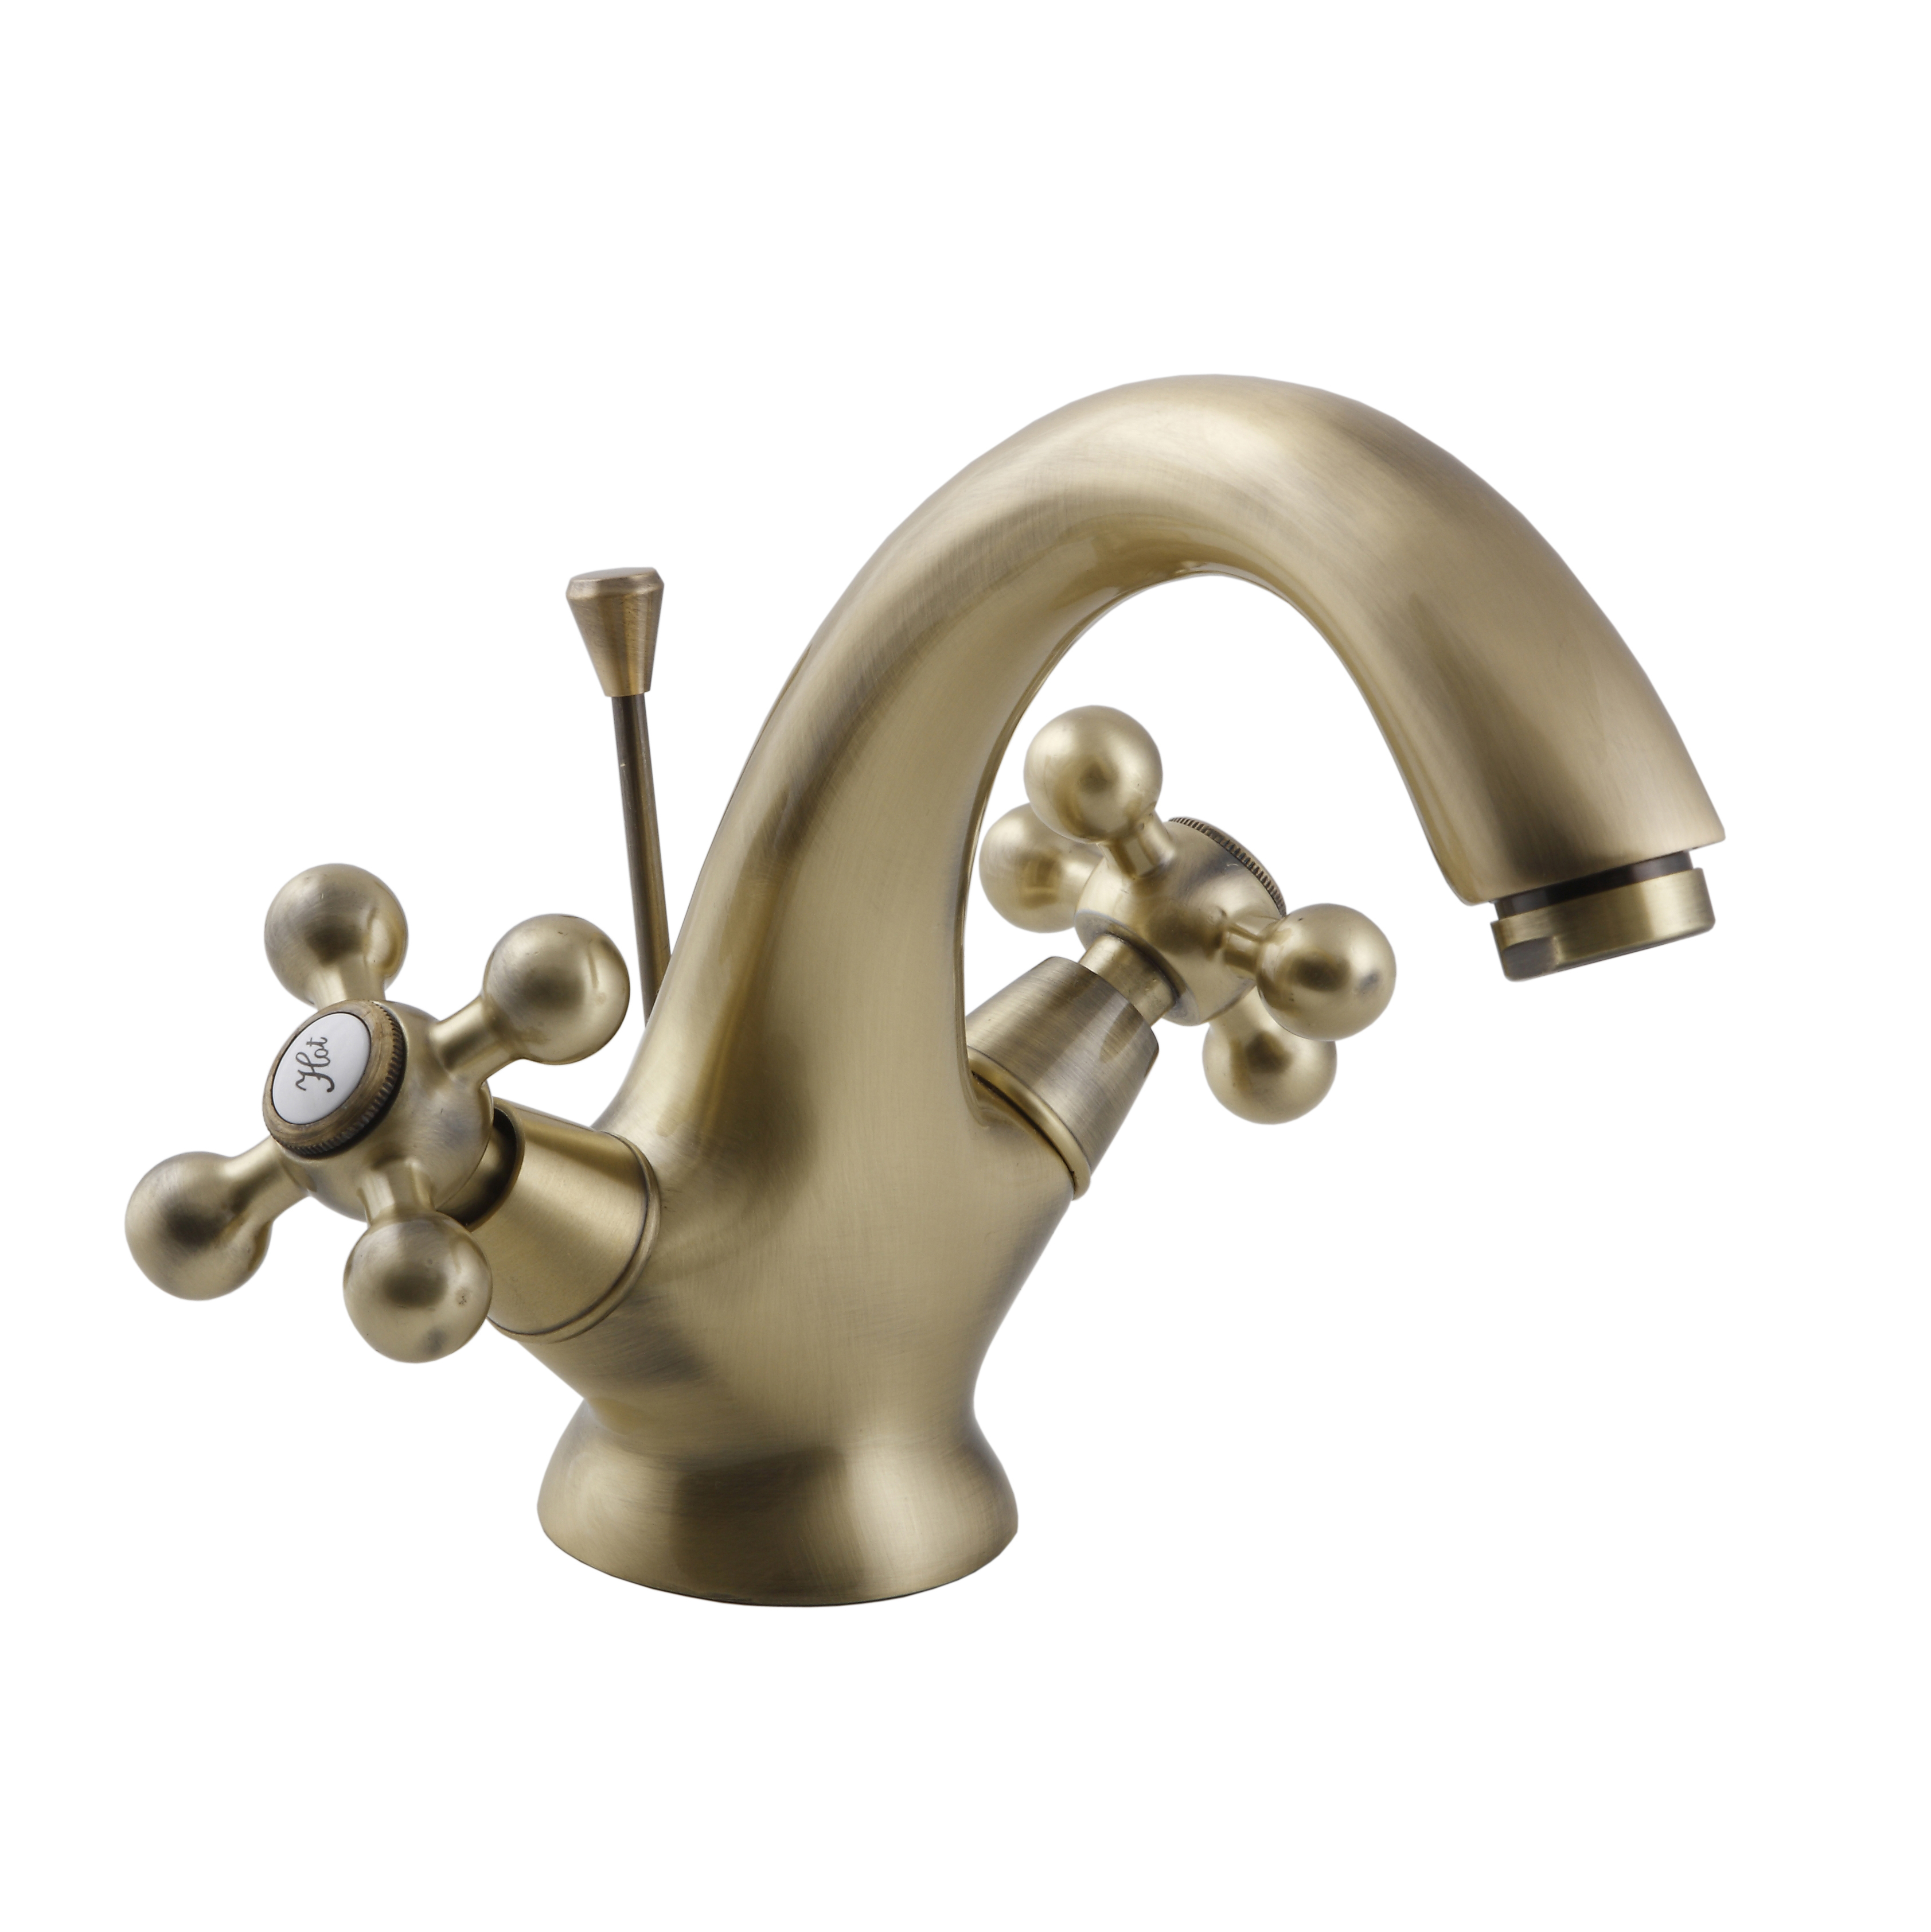 What Are The Common Types Of Basin Faucets?